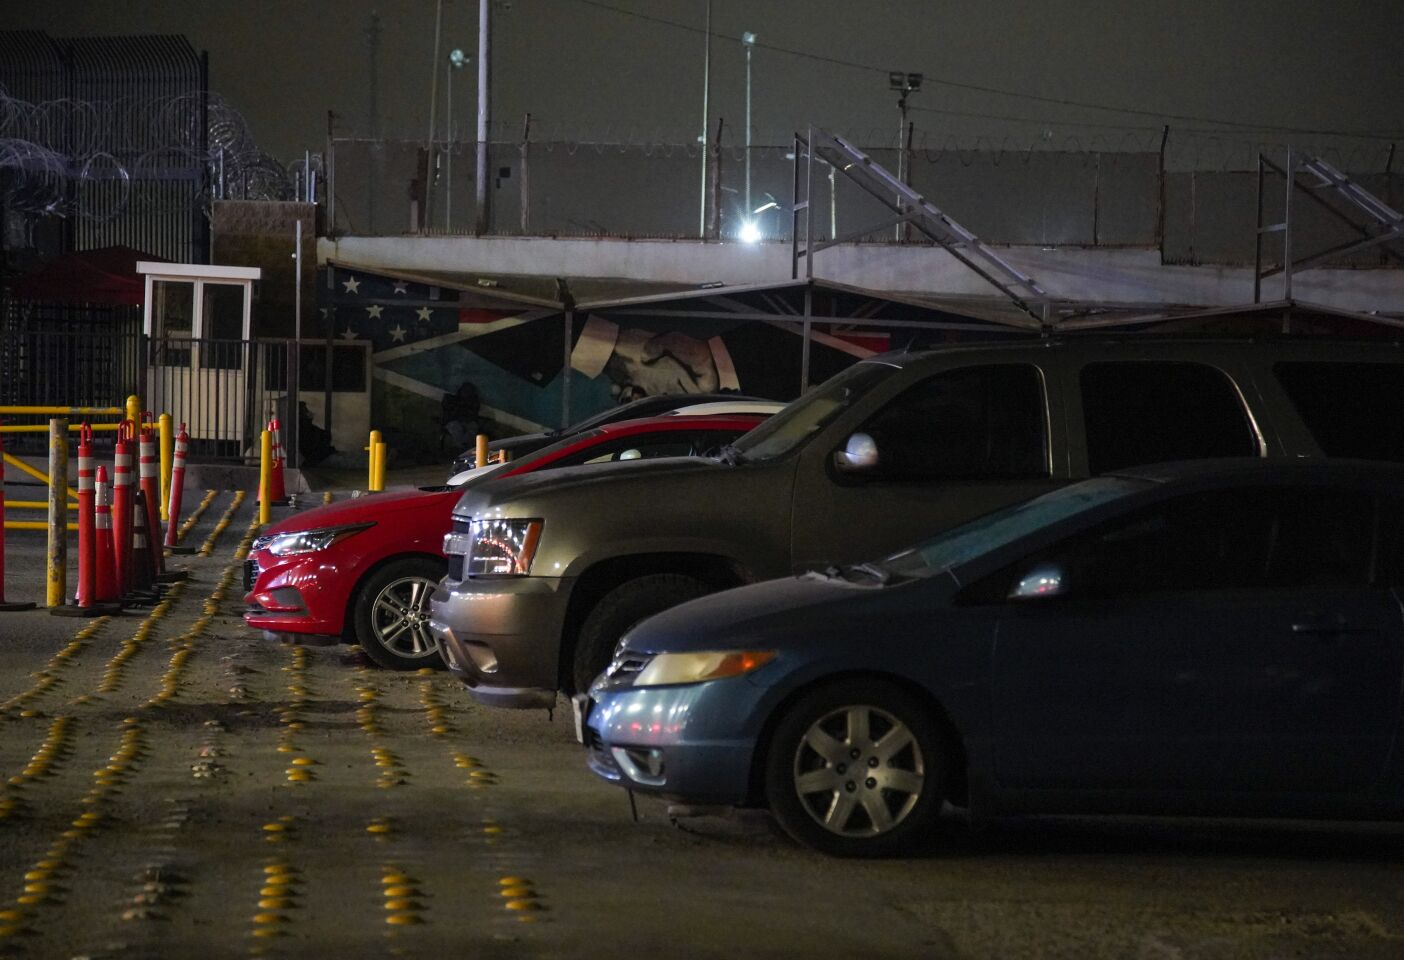 People have been sleeping in their cars at the Otay border to wait for the port of entry to open; it started happening after the hours of service of the border port of entry were reduced.